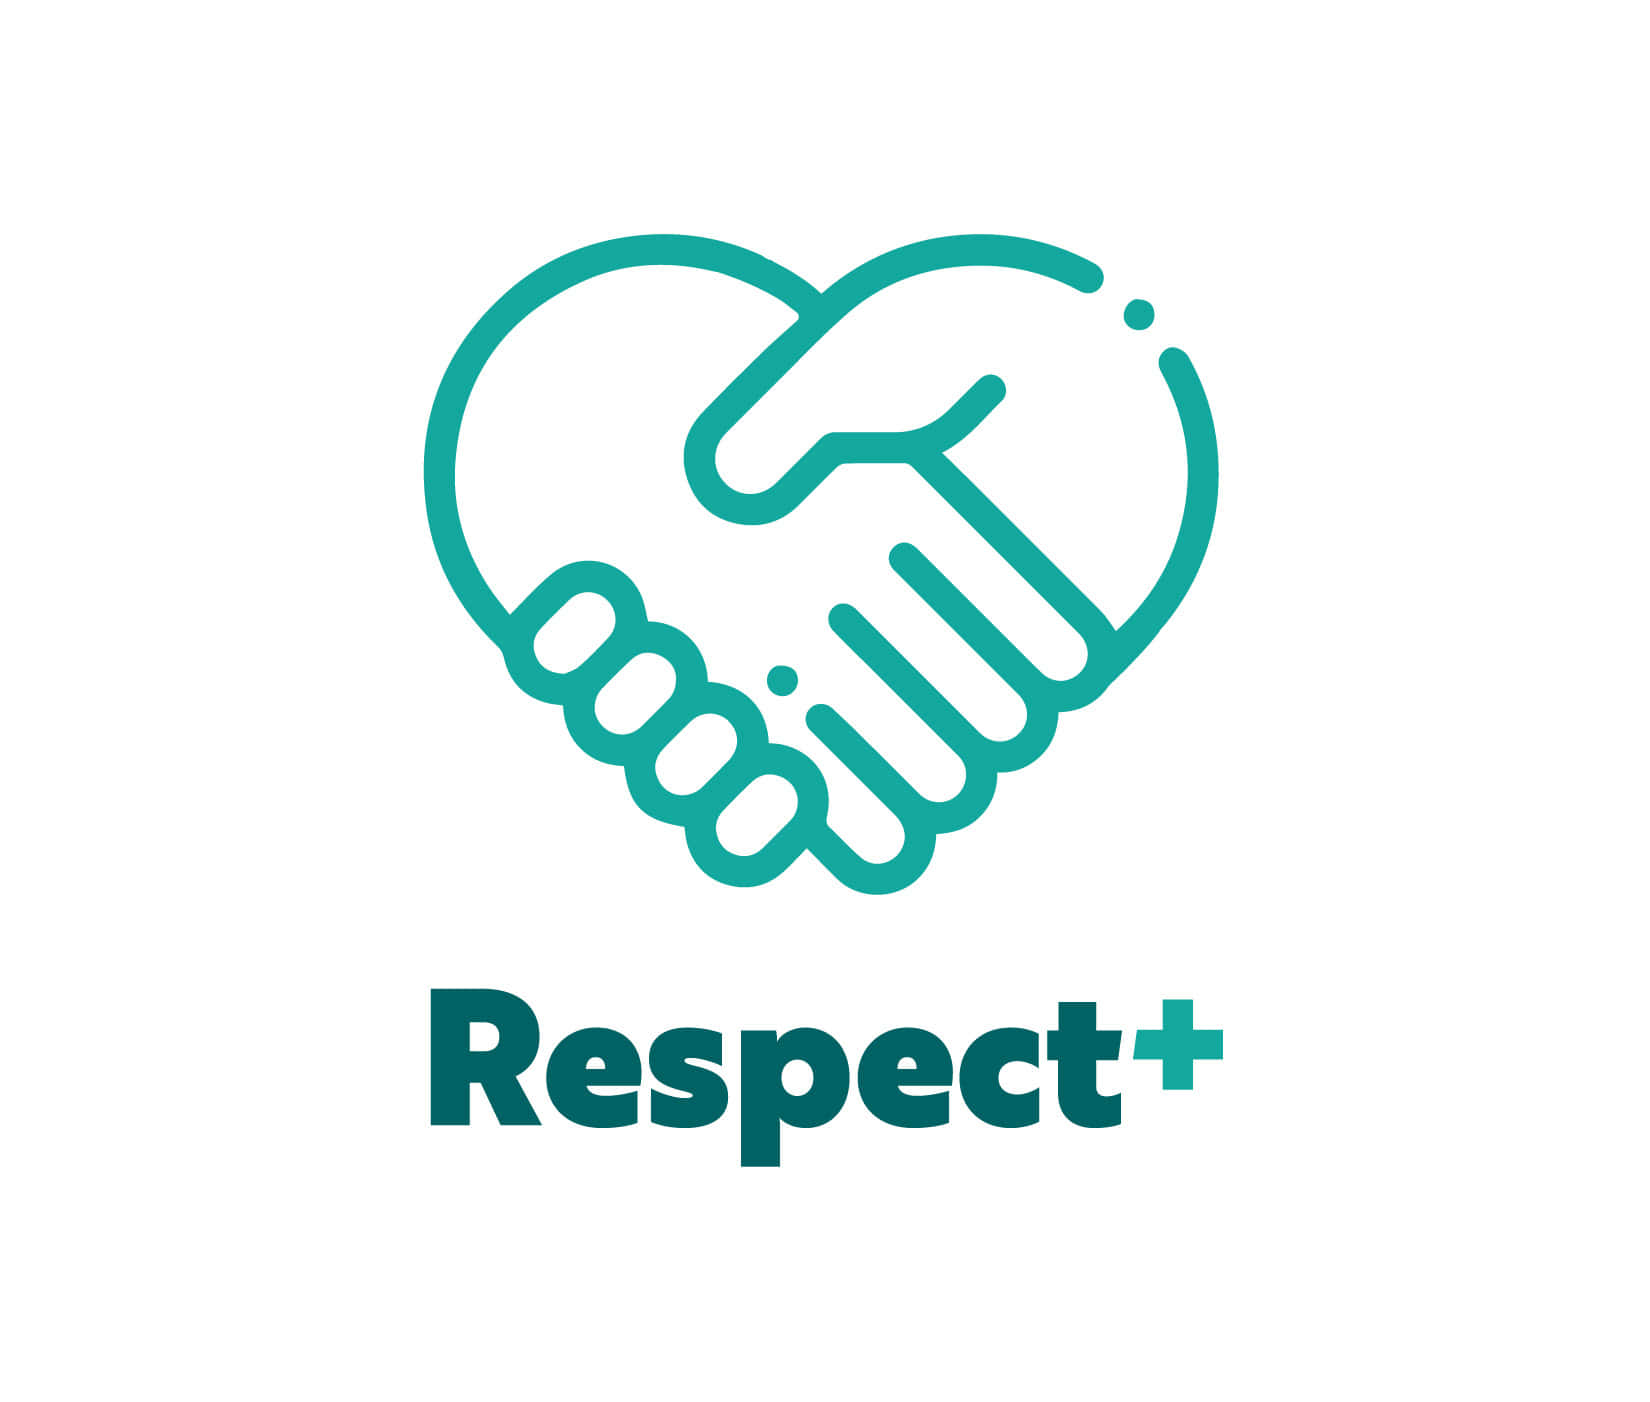 respect + logo with a handshake